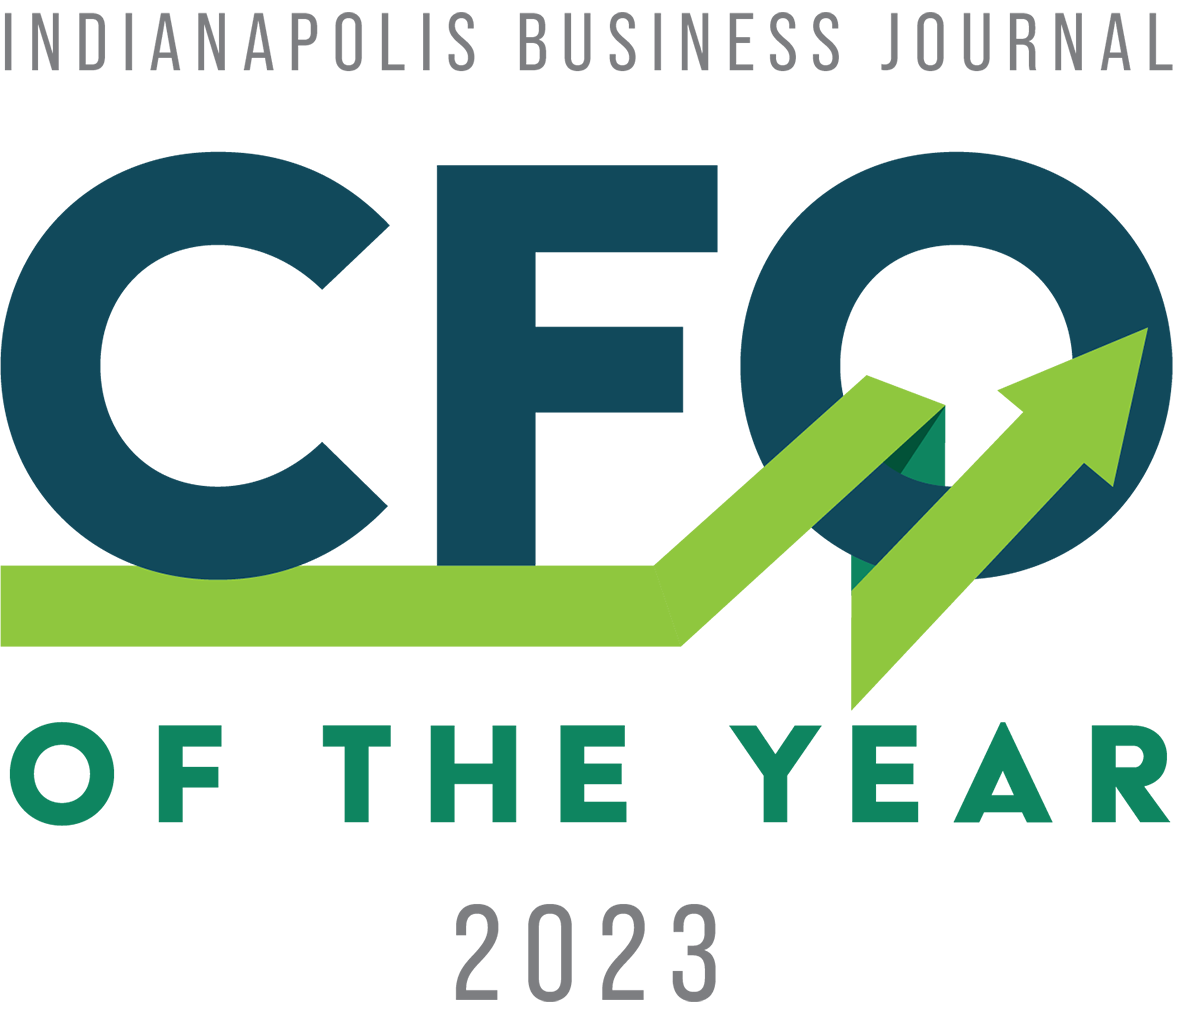 Indianapolis Business Journal CFO of the Year 2023